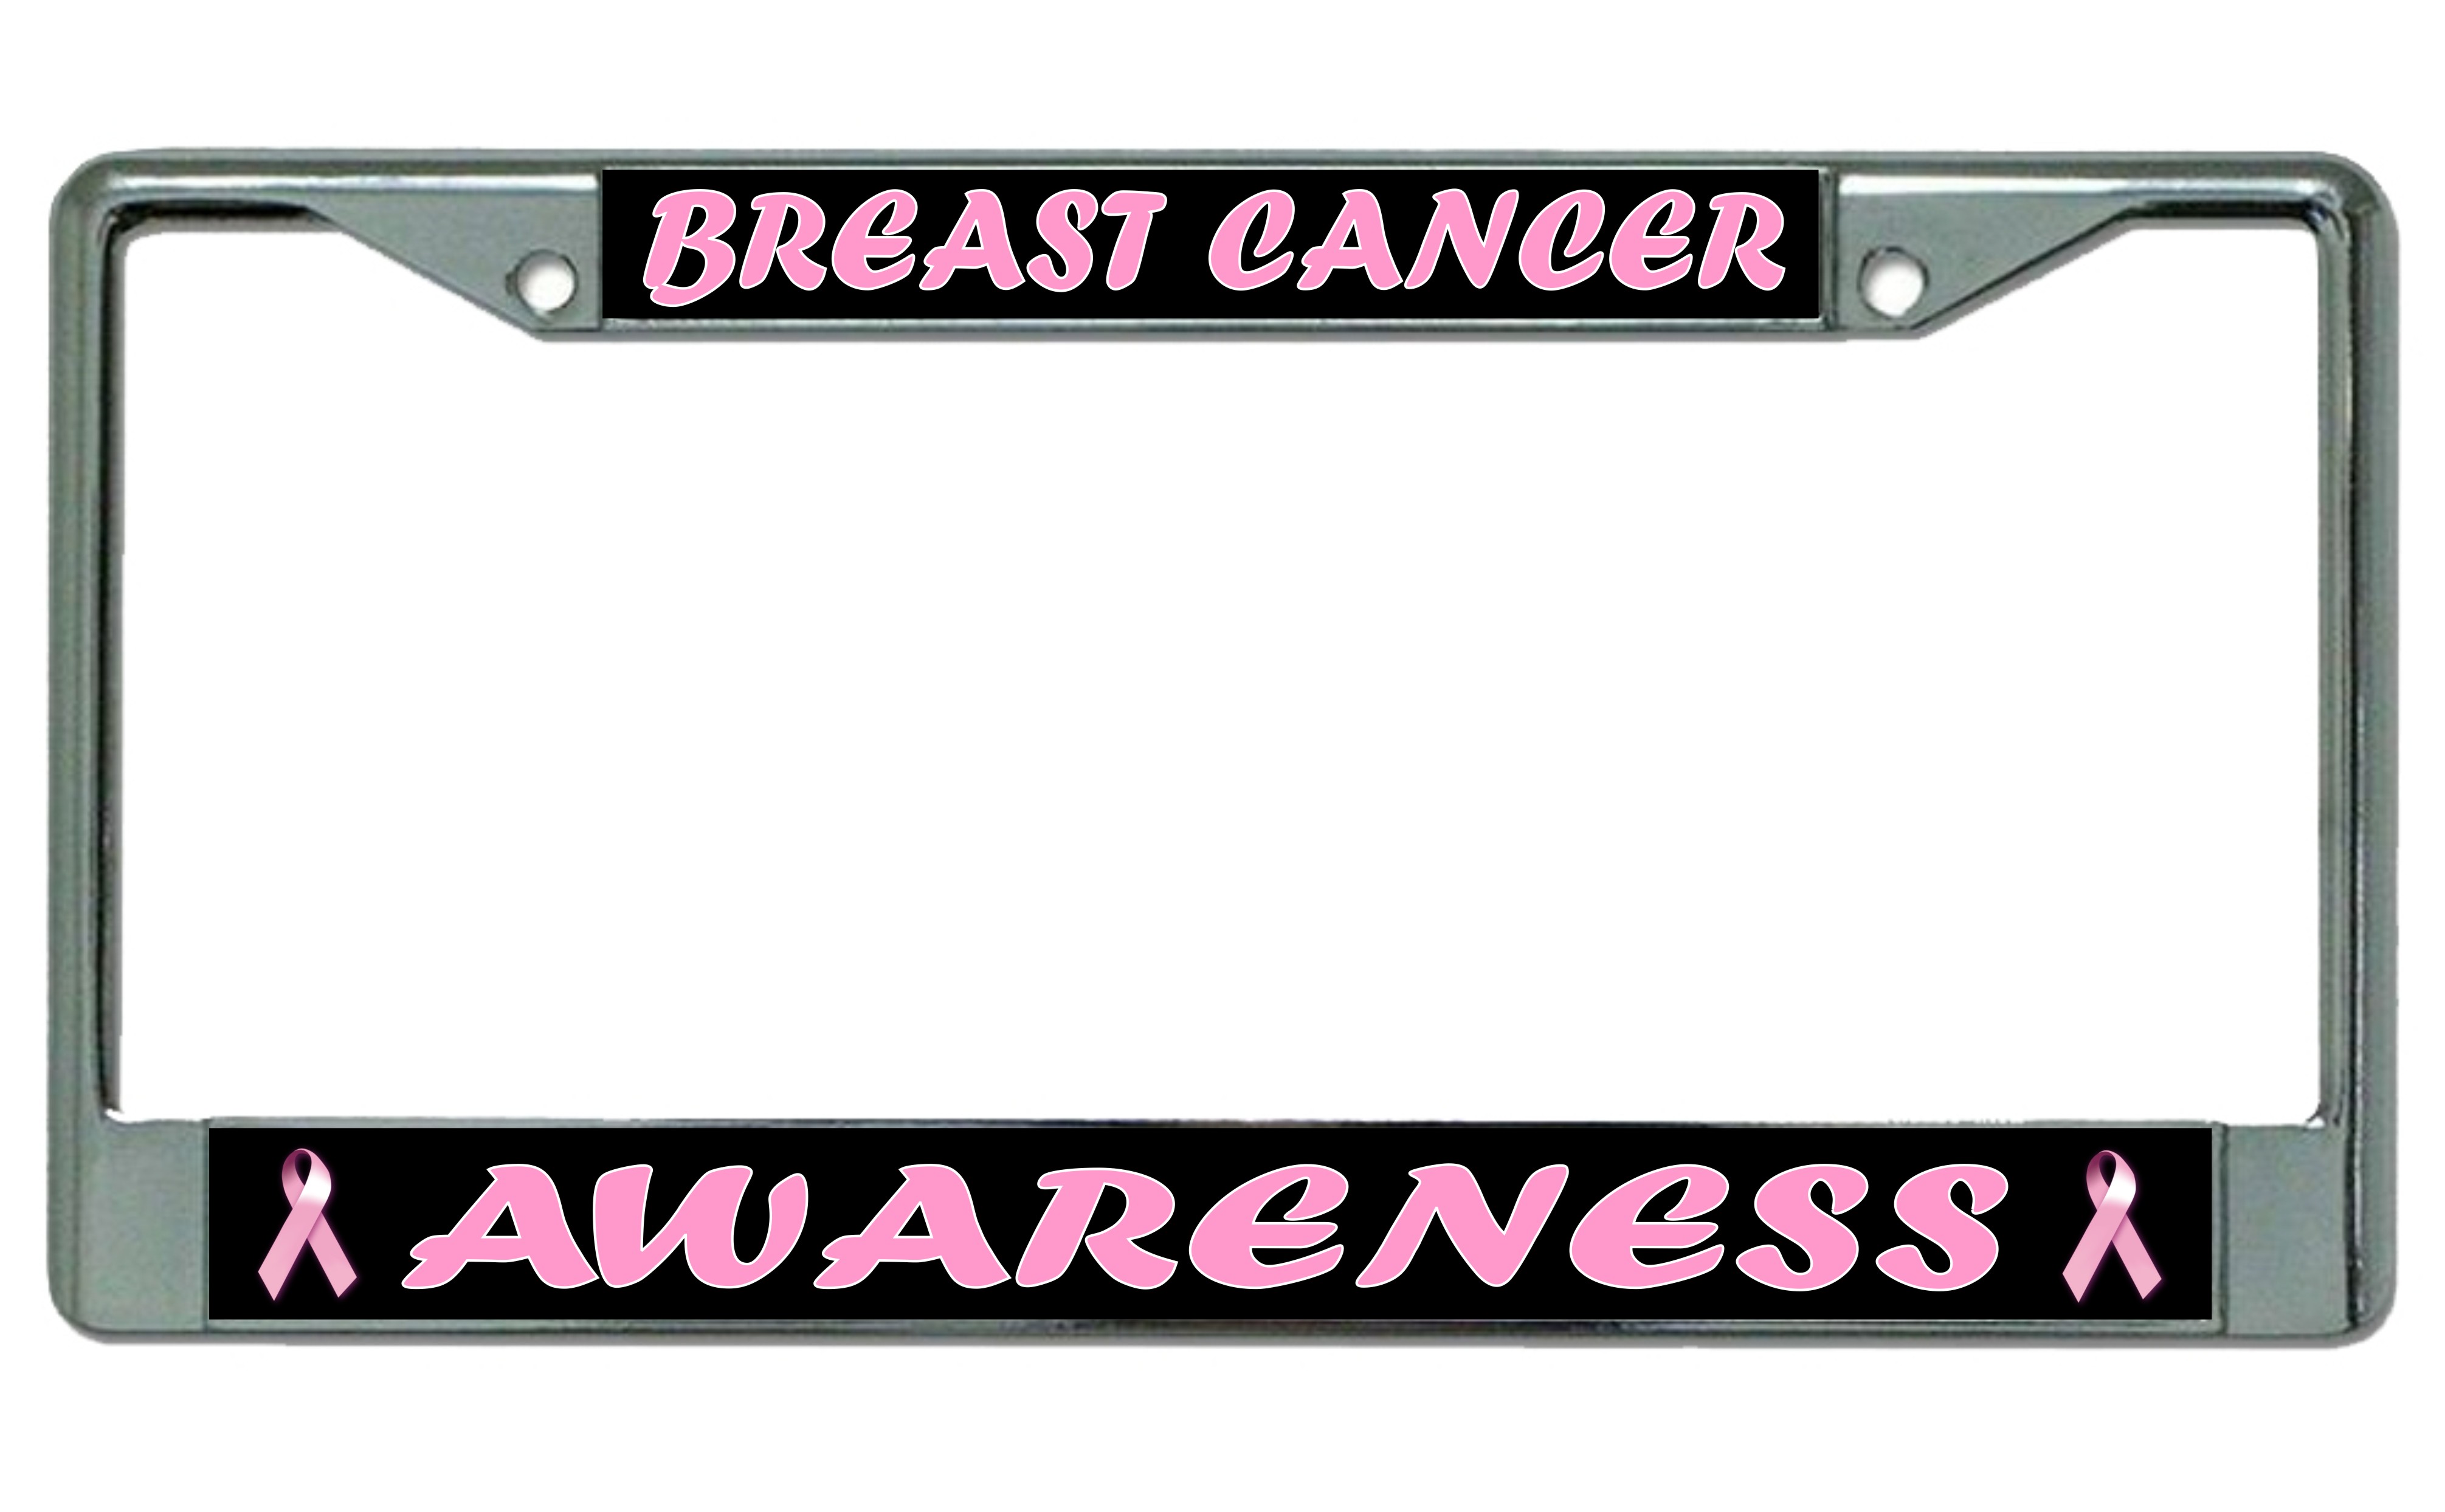 Breast Cancer Awareness Photo License Plate Frame  Free SCREW Caps with this Frame